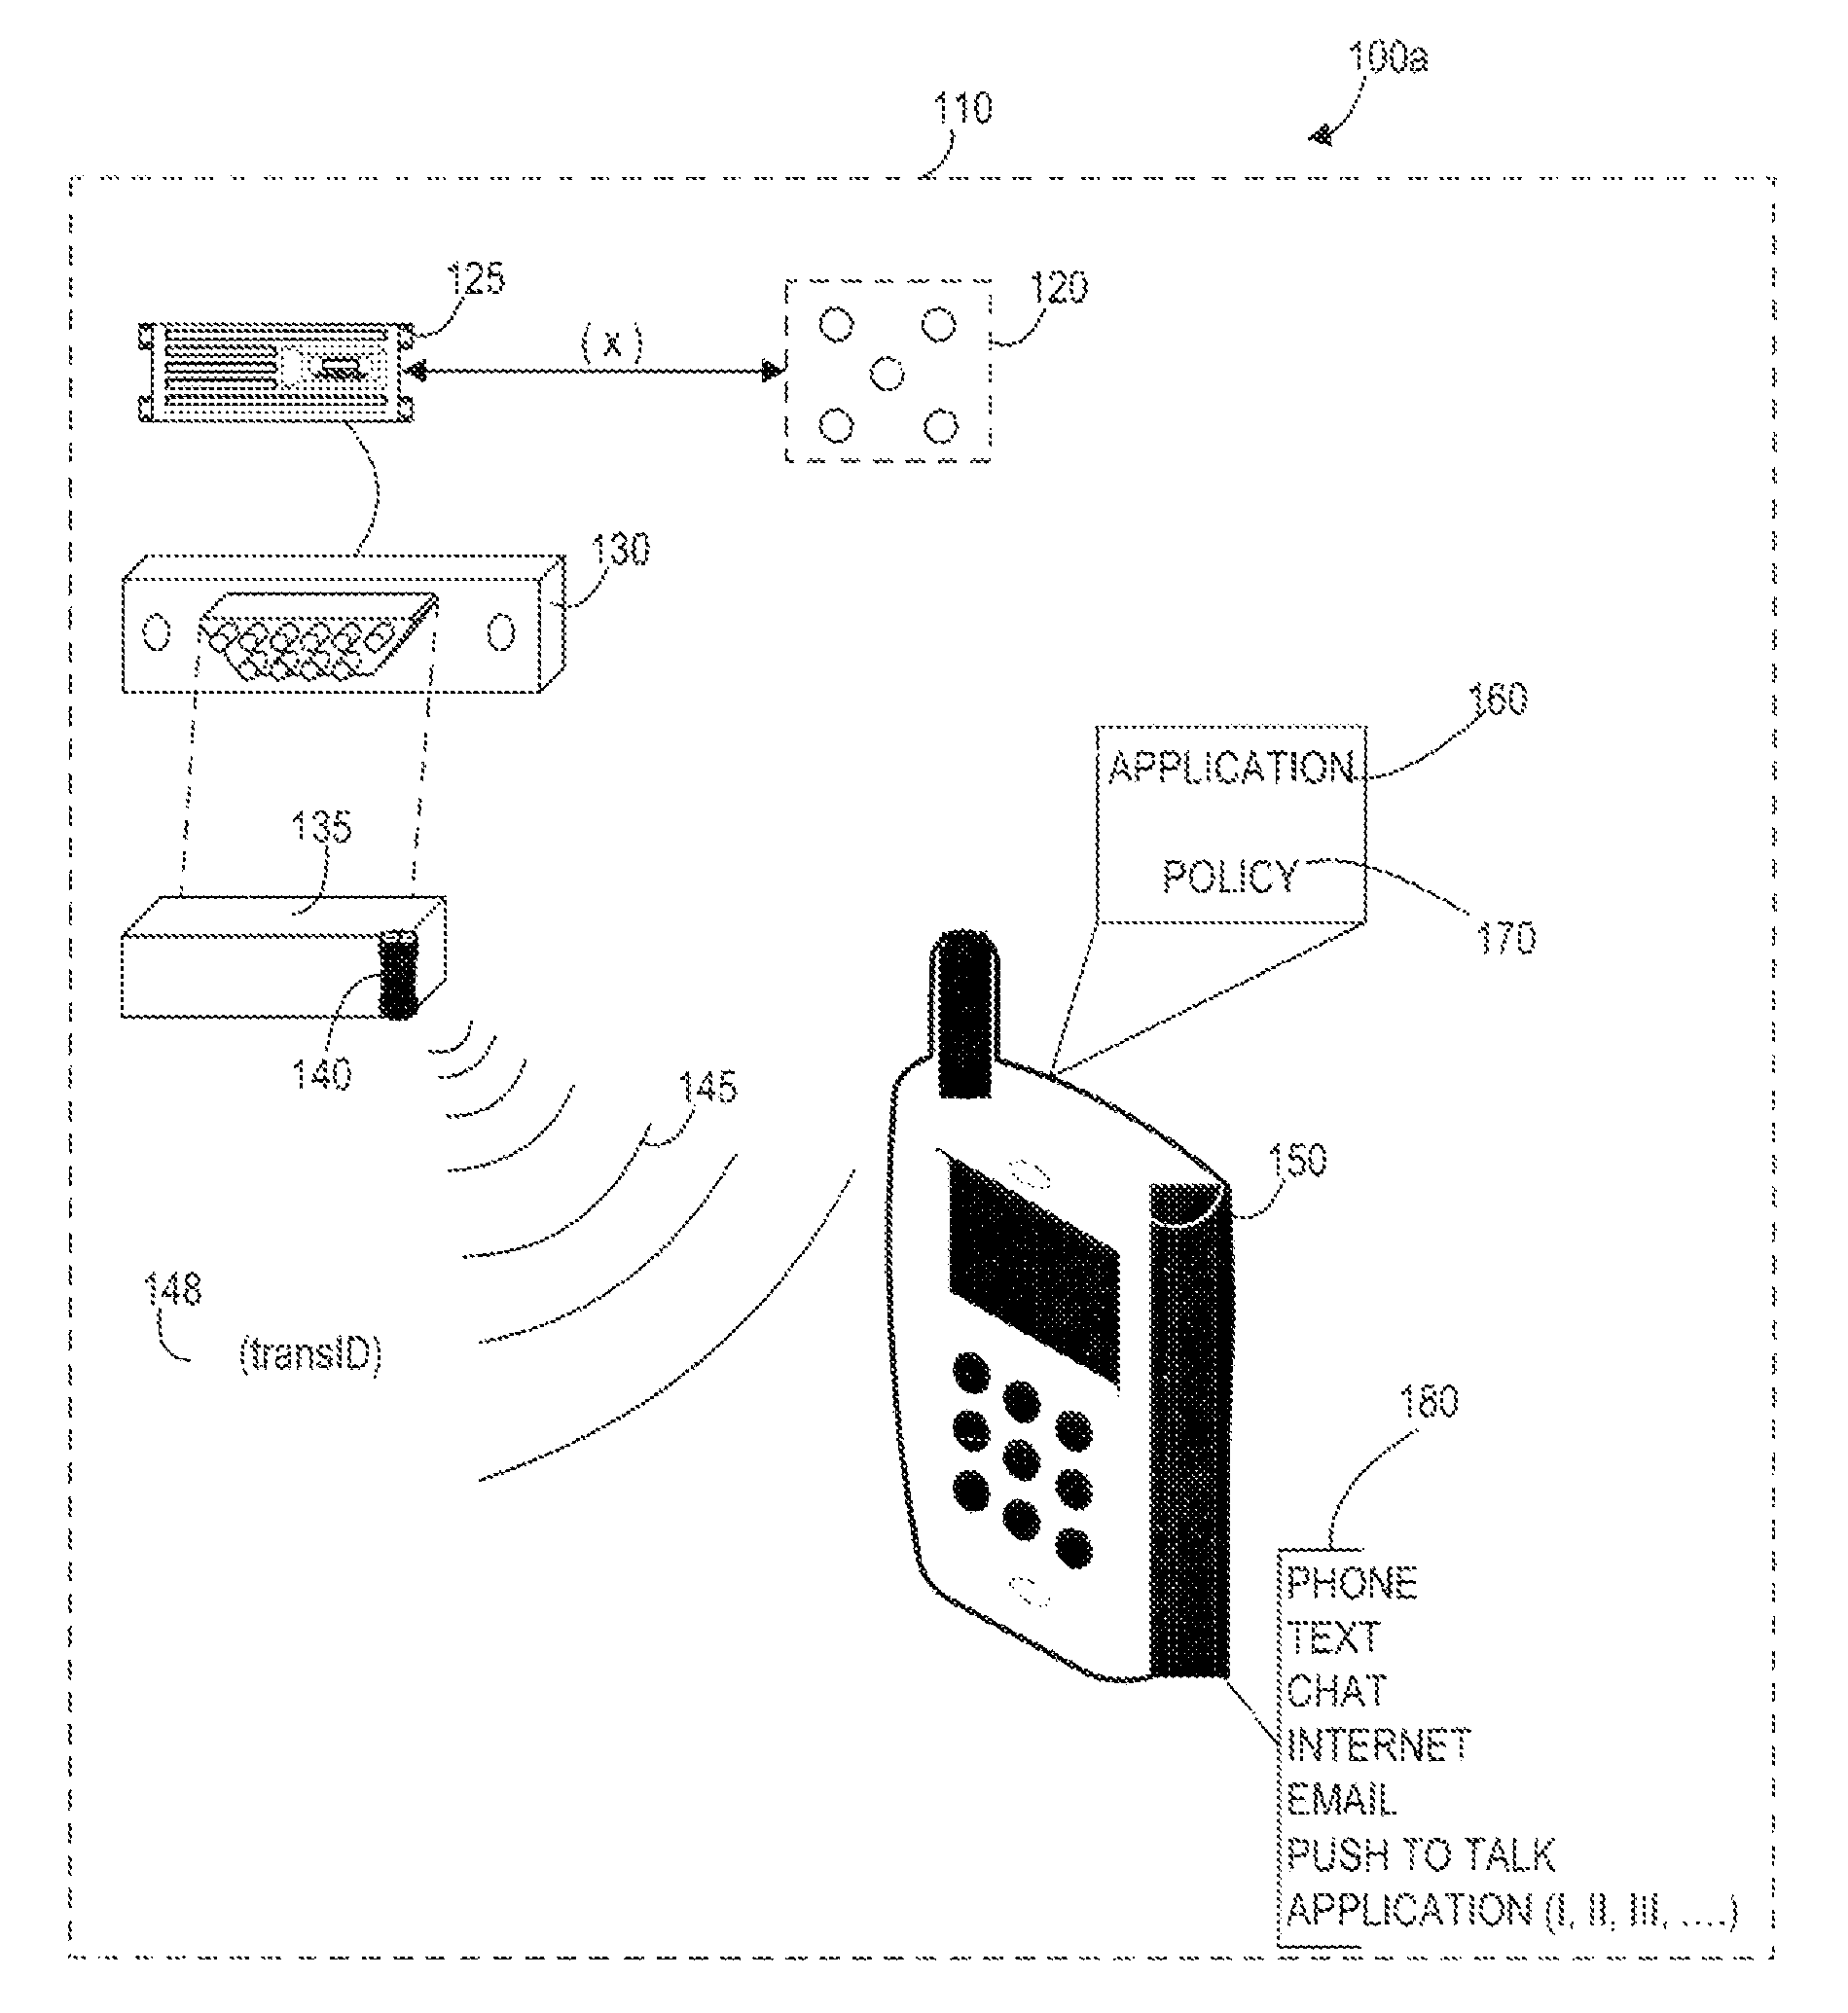 Systems, methods, and devices for policy-based control and monitoring of use of mobile devices by vehicle operators